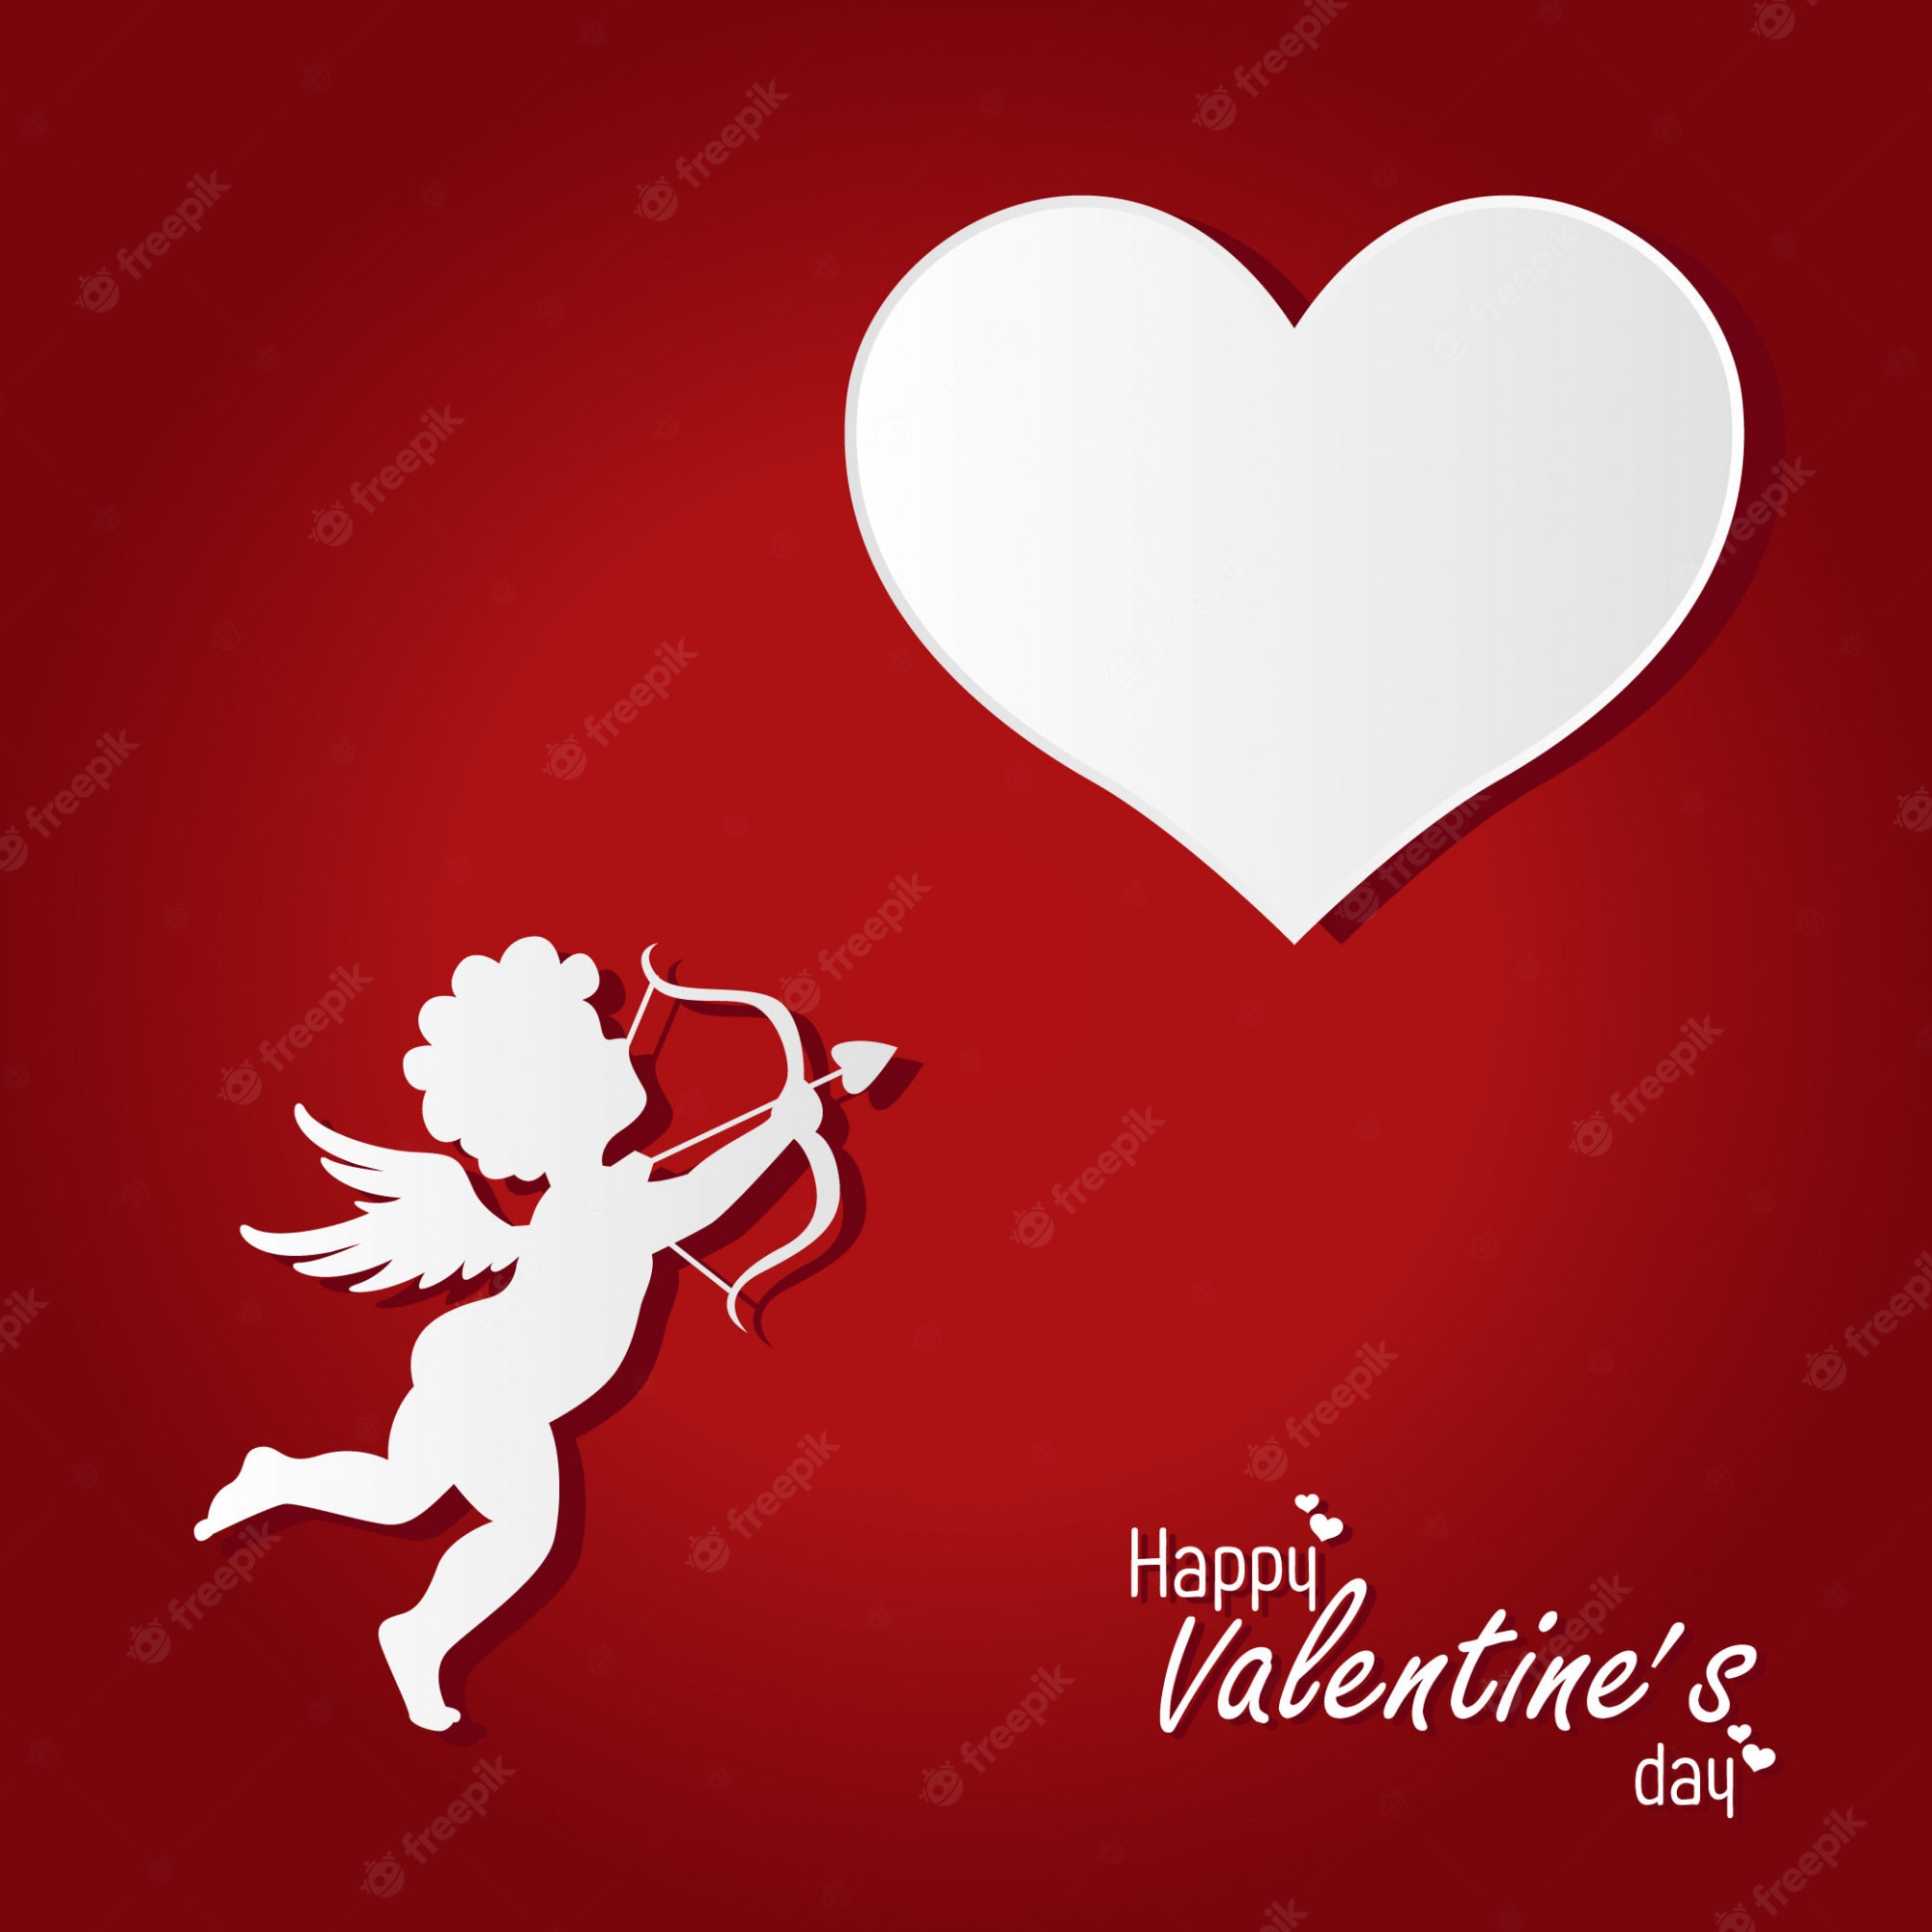 Premium Vector. Valentines day background with cupid